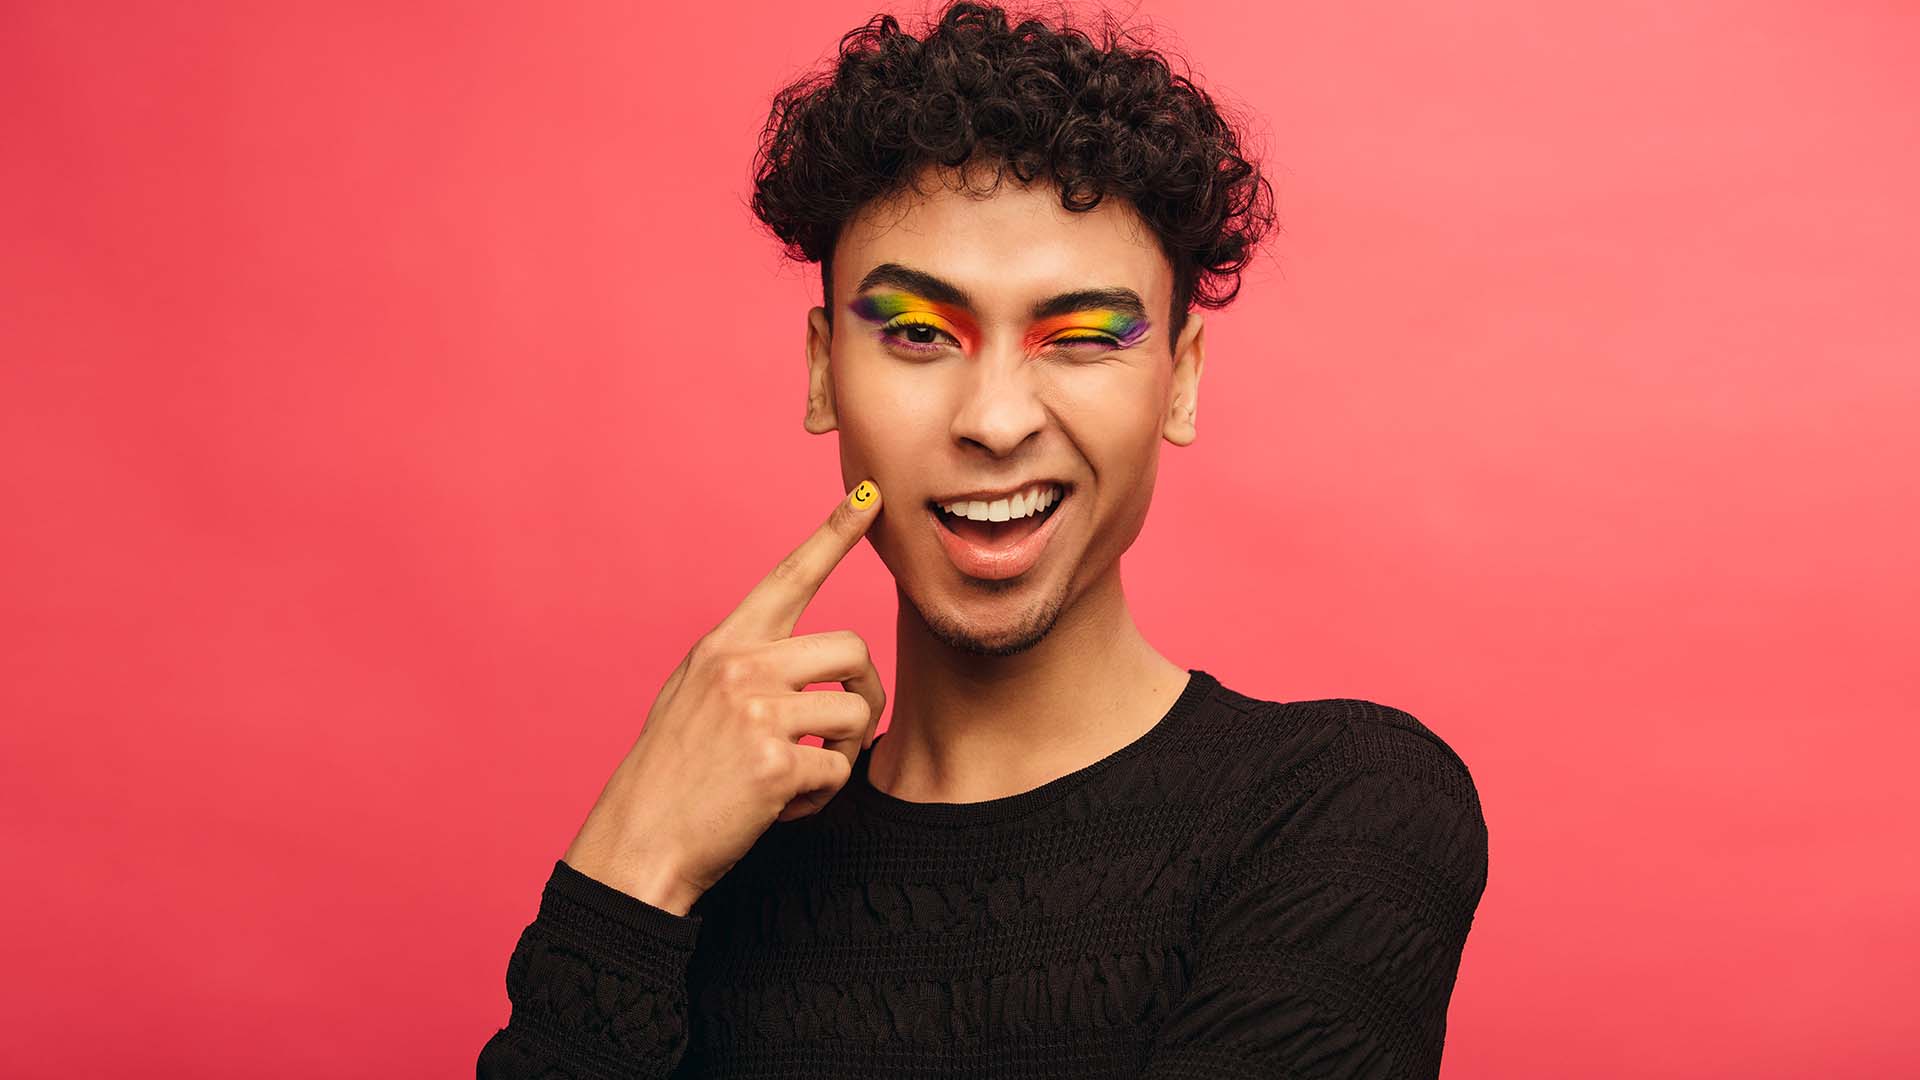 Brunette trans person in rainbow eye shadow in front of red background wearing back shirt, winking while smiling.